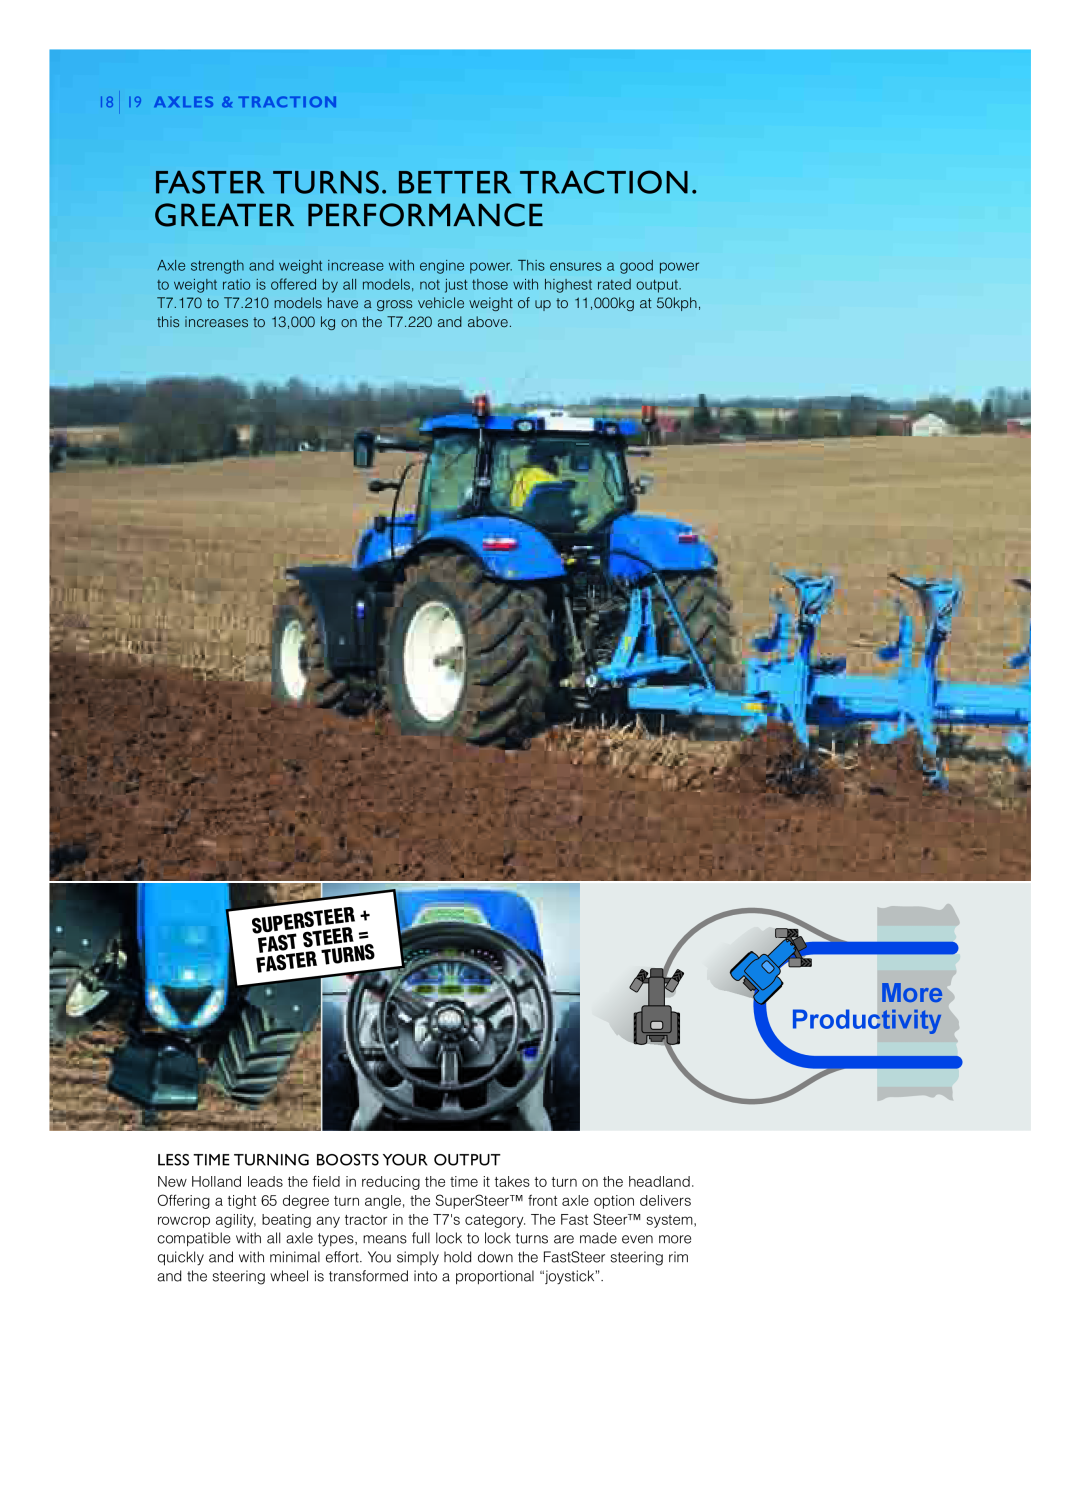 New Holland T7.270 Supersteer, Turns, 18 19 AXLES & TRACTION, Steer, Faster, Less Time Turning Boosts Your Output 